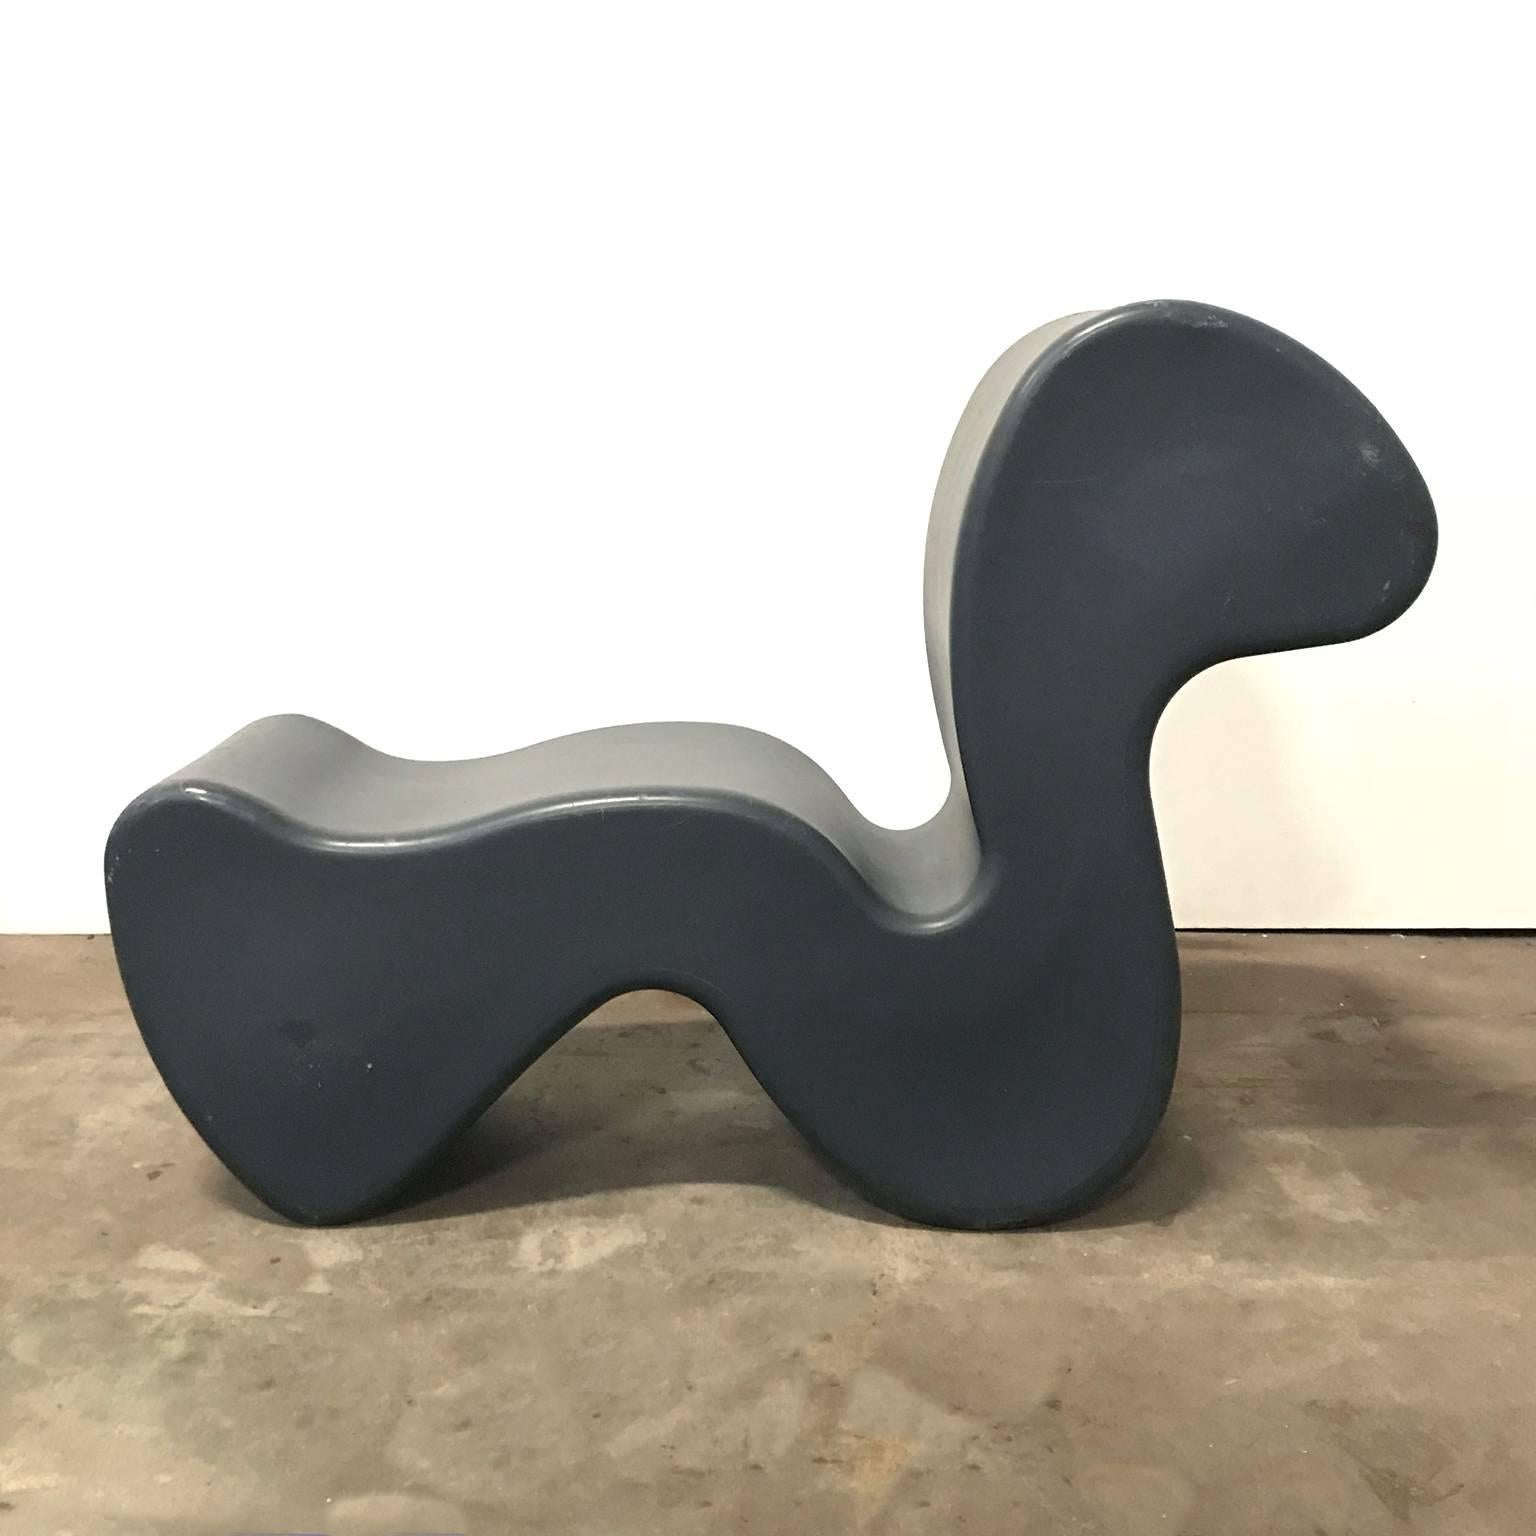 Phantom in dark grey / black. Original Phantom chair/table in plastic including marks and stamps. Multiuse chair, bench, table designed by Verner Panton. By rotating the form you can change its function; high back lounge chair, deep seated lounge